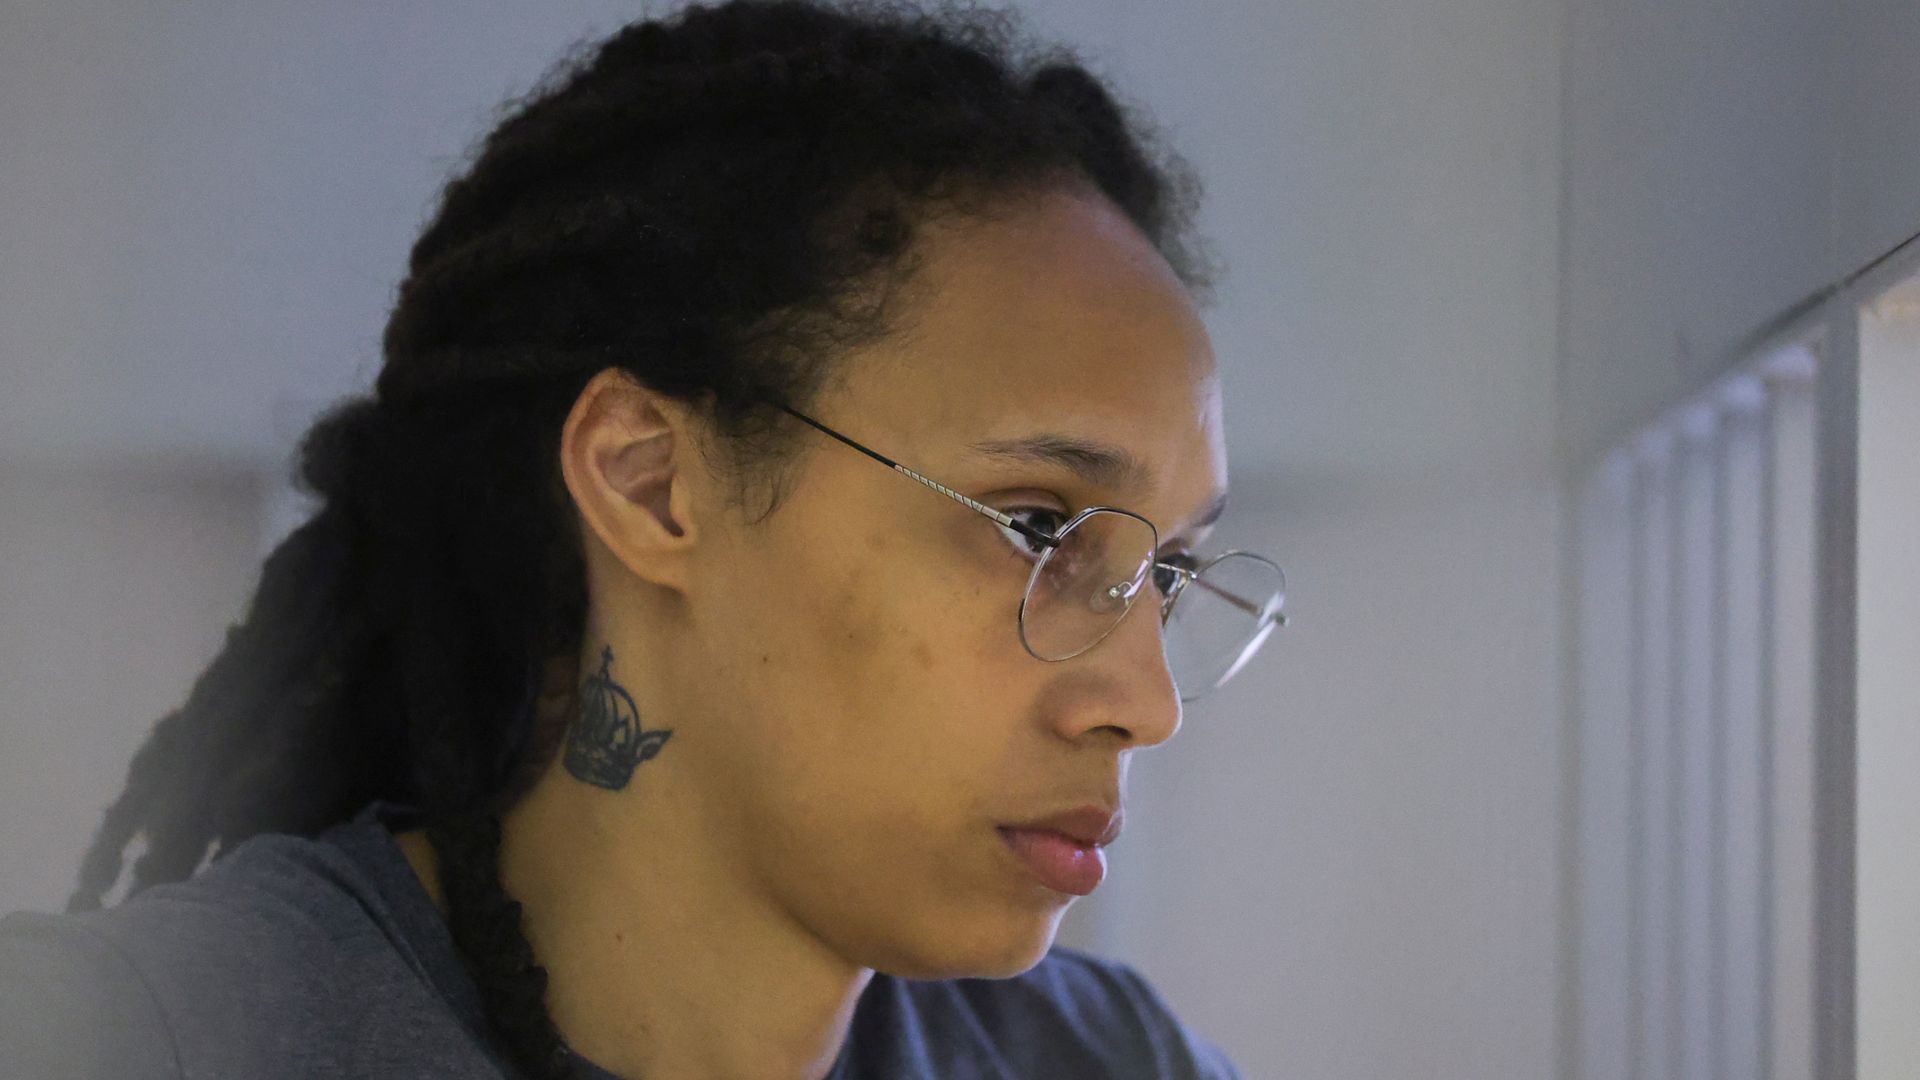 Russian judge sentences WNBA's Griner to nine years in prison on drug charges